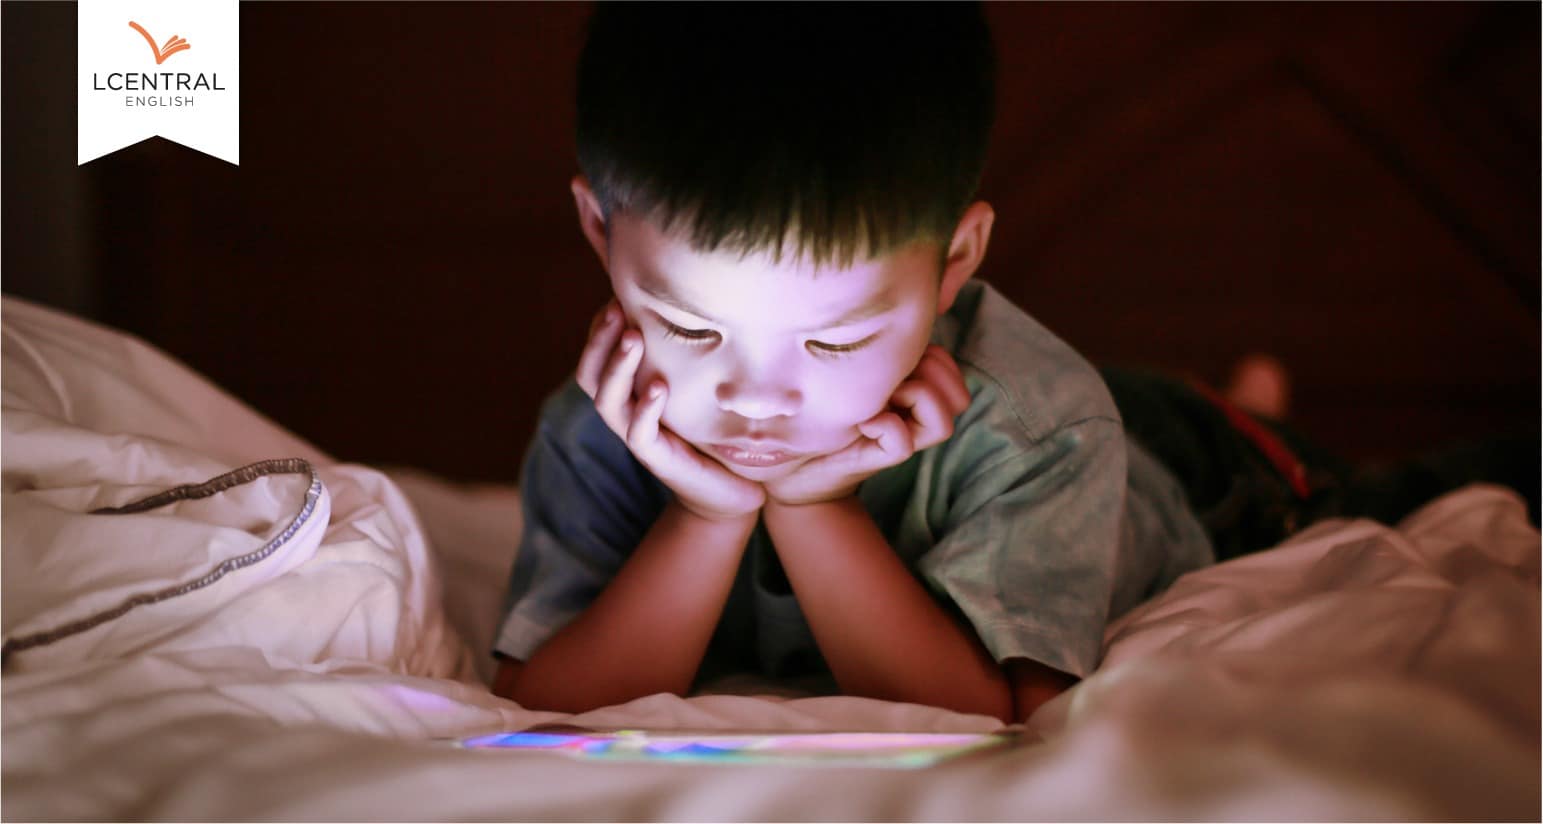 The child using tech gadgets during school breaks